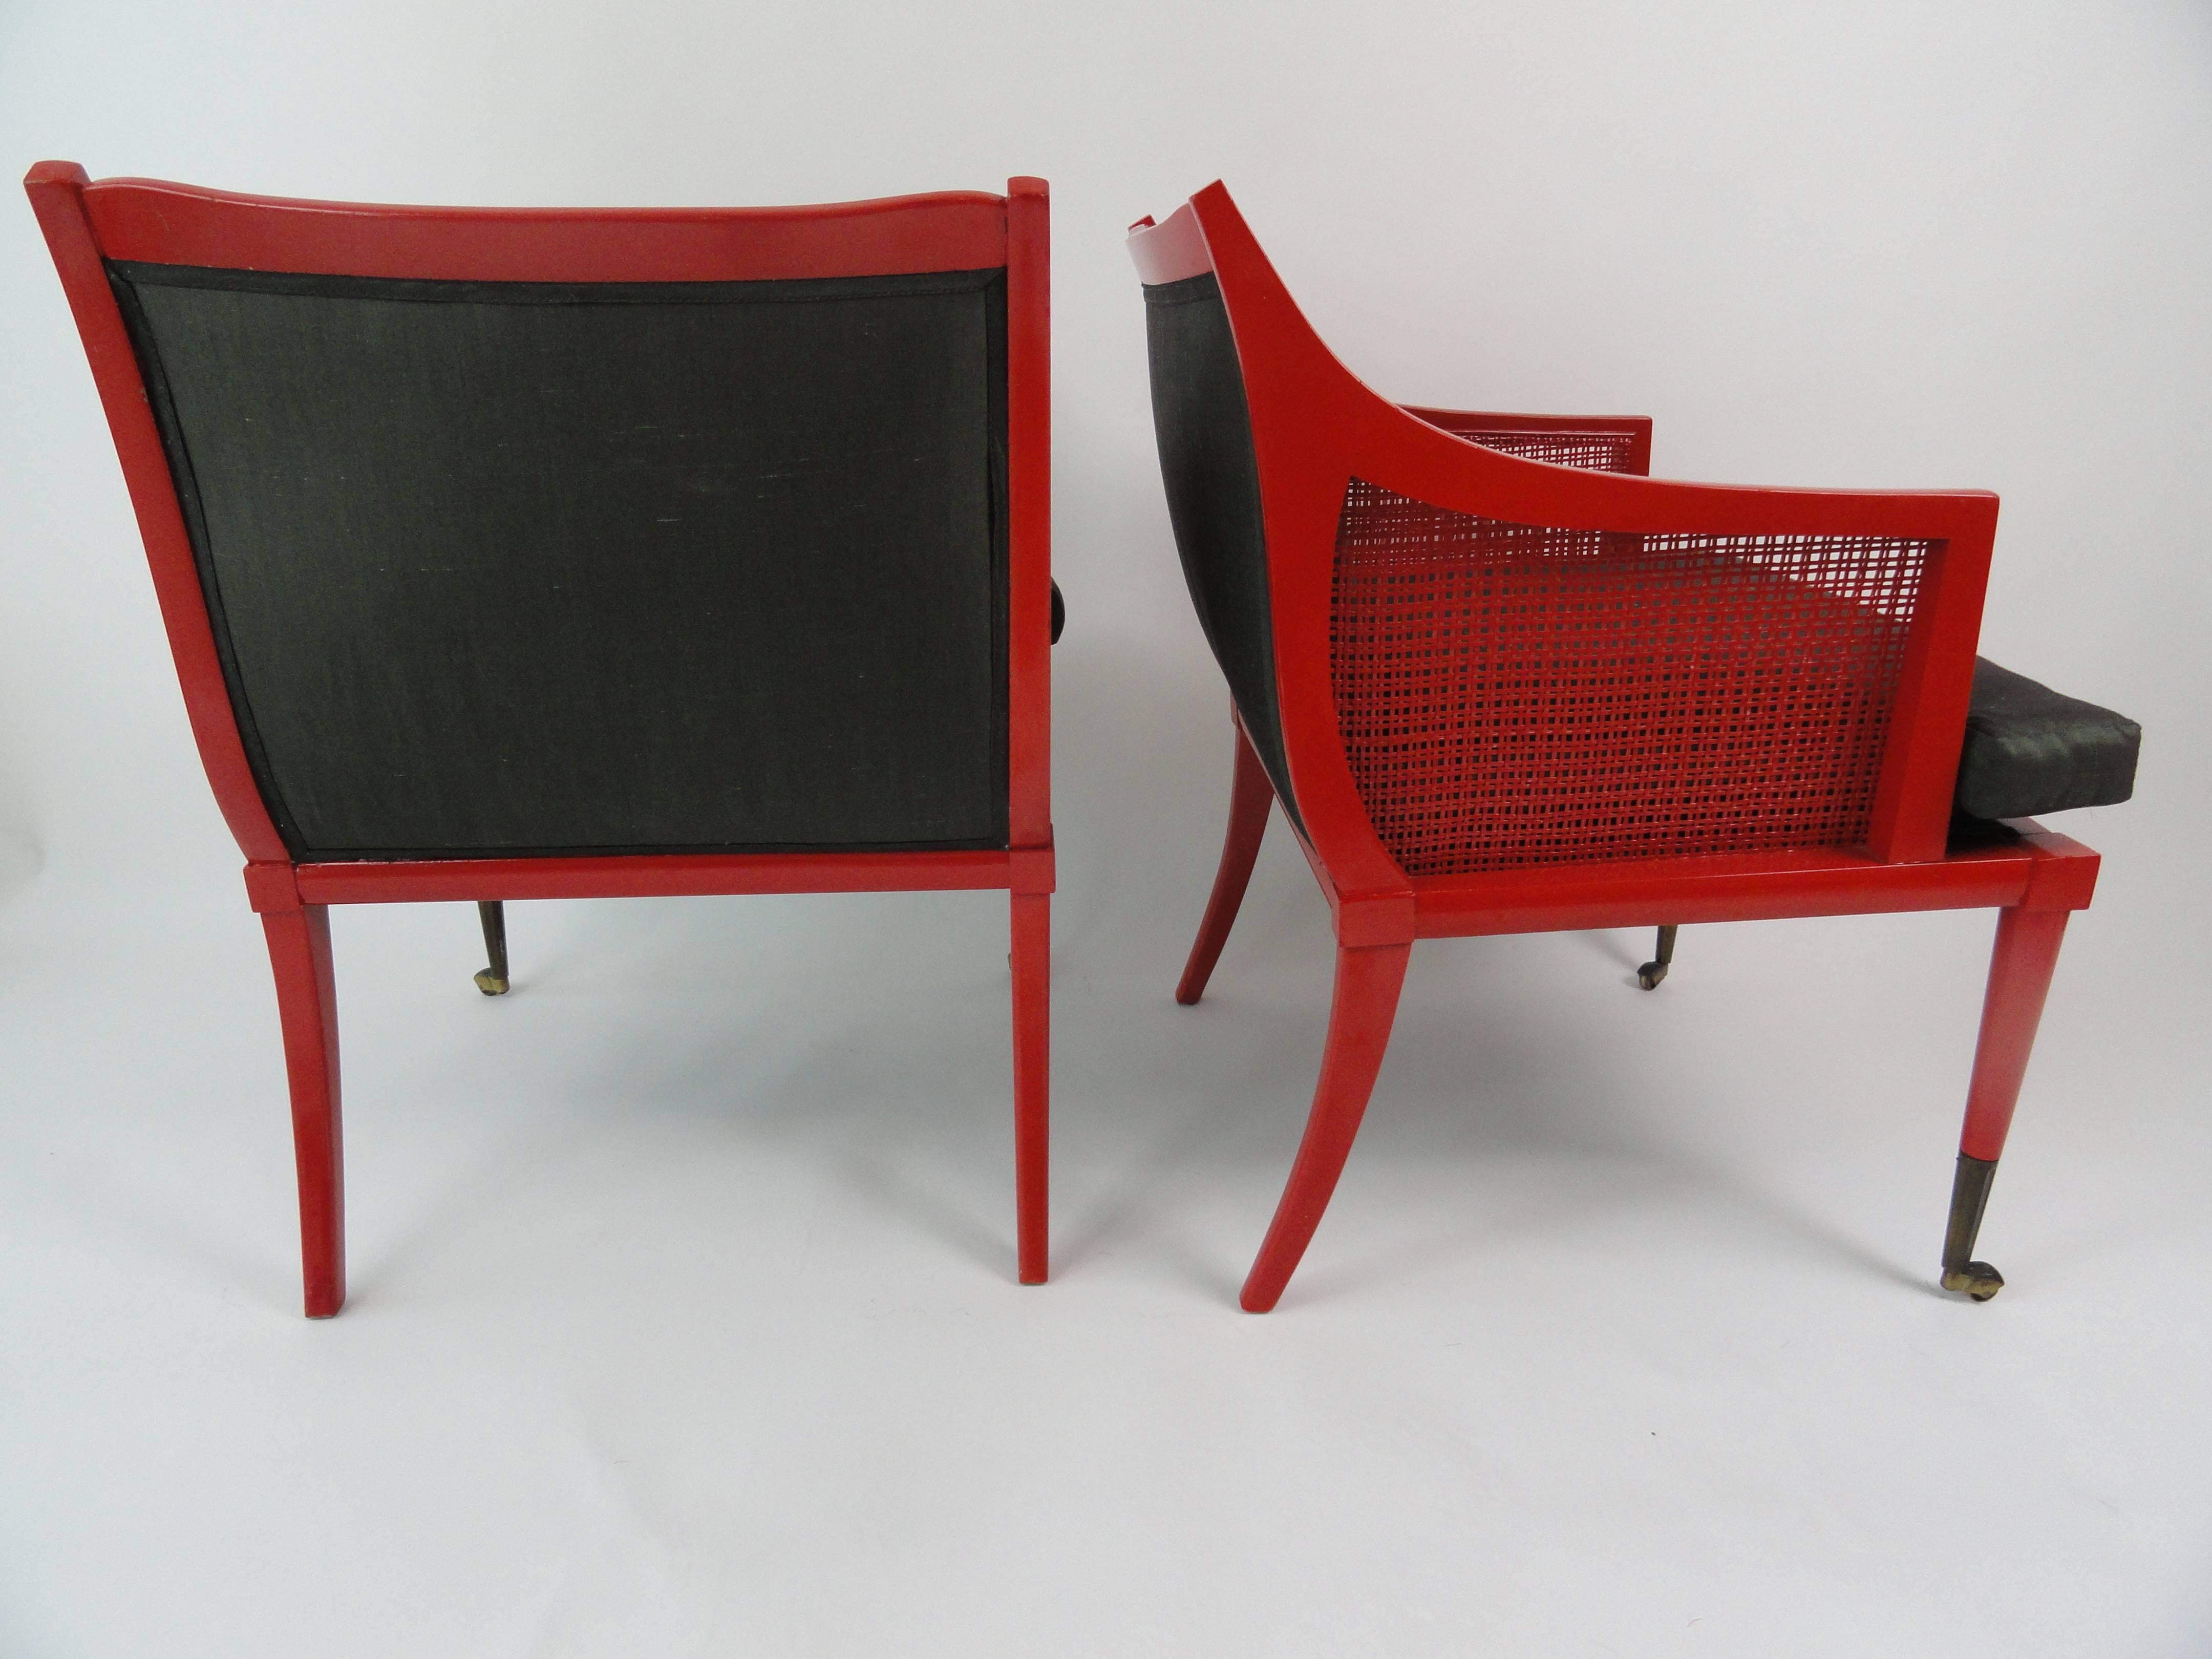 Pair of red lacquer wood chairs, sculptural form with brass sabot, cane sides. Modernist style by Edward Wormley.
Henry Calvin Athena Taffeta
Very comfortable.